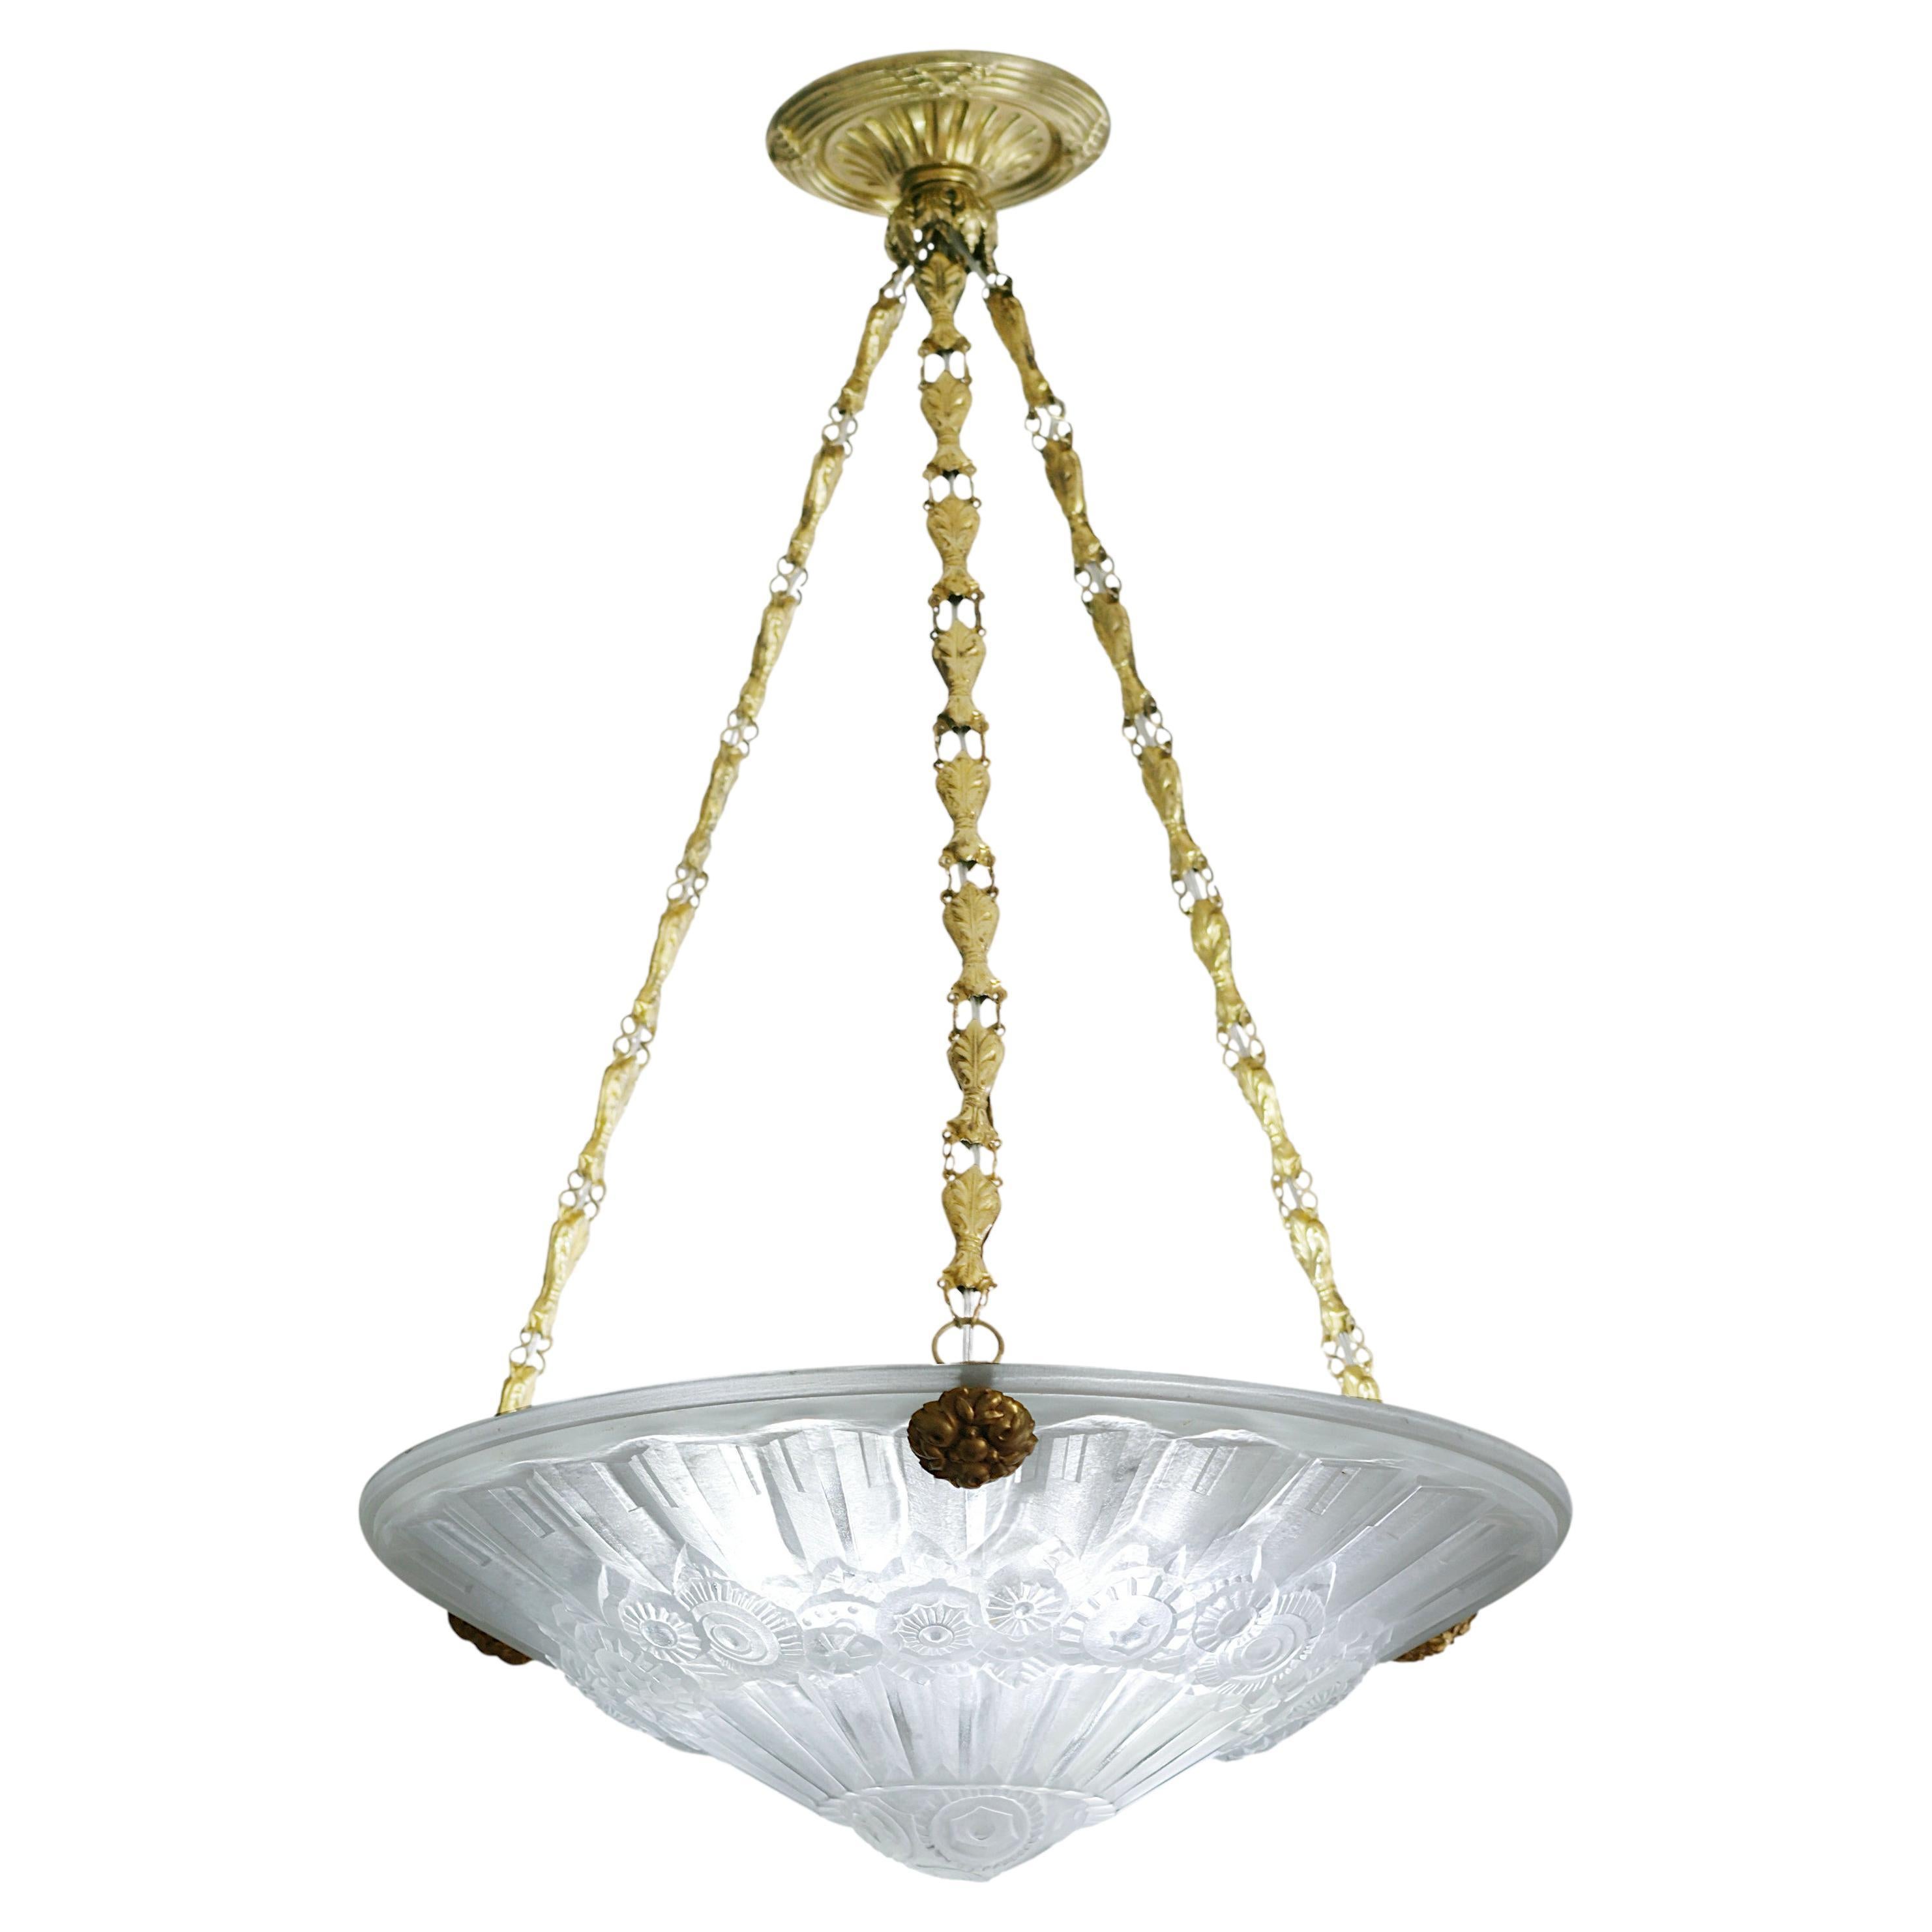 Jean Gauthier French Art Deco Pendant Chandelier, Late 1920s For Sale